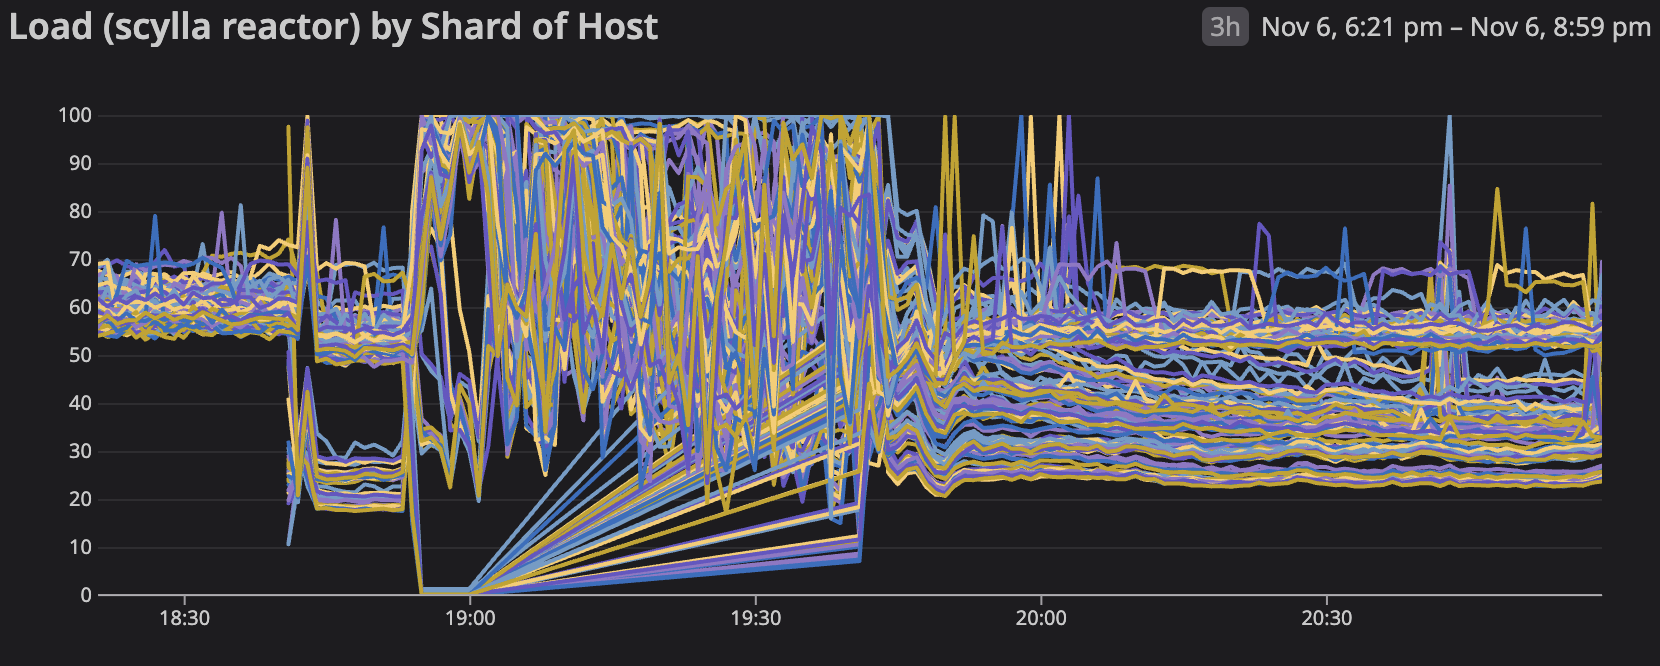 Chart for "Load (scylla reactor) by Shard of Host" with many lines jumping during the 19:00 to 19:45 time period.